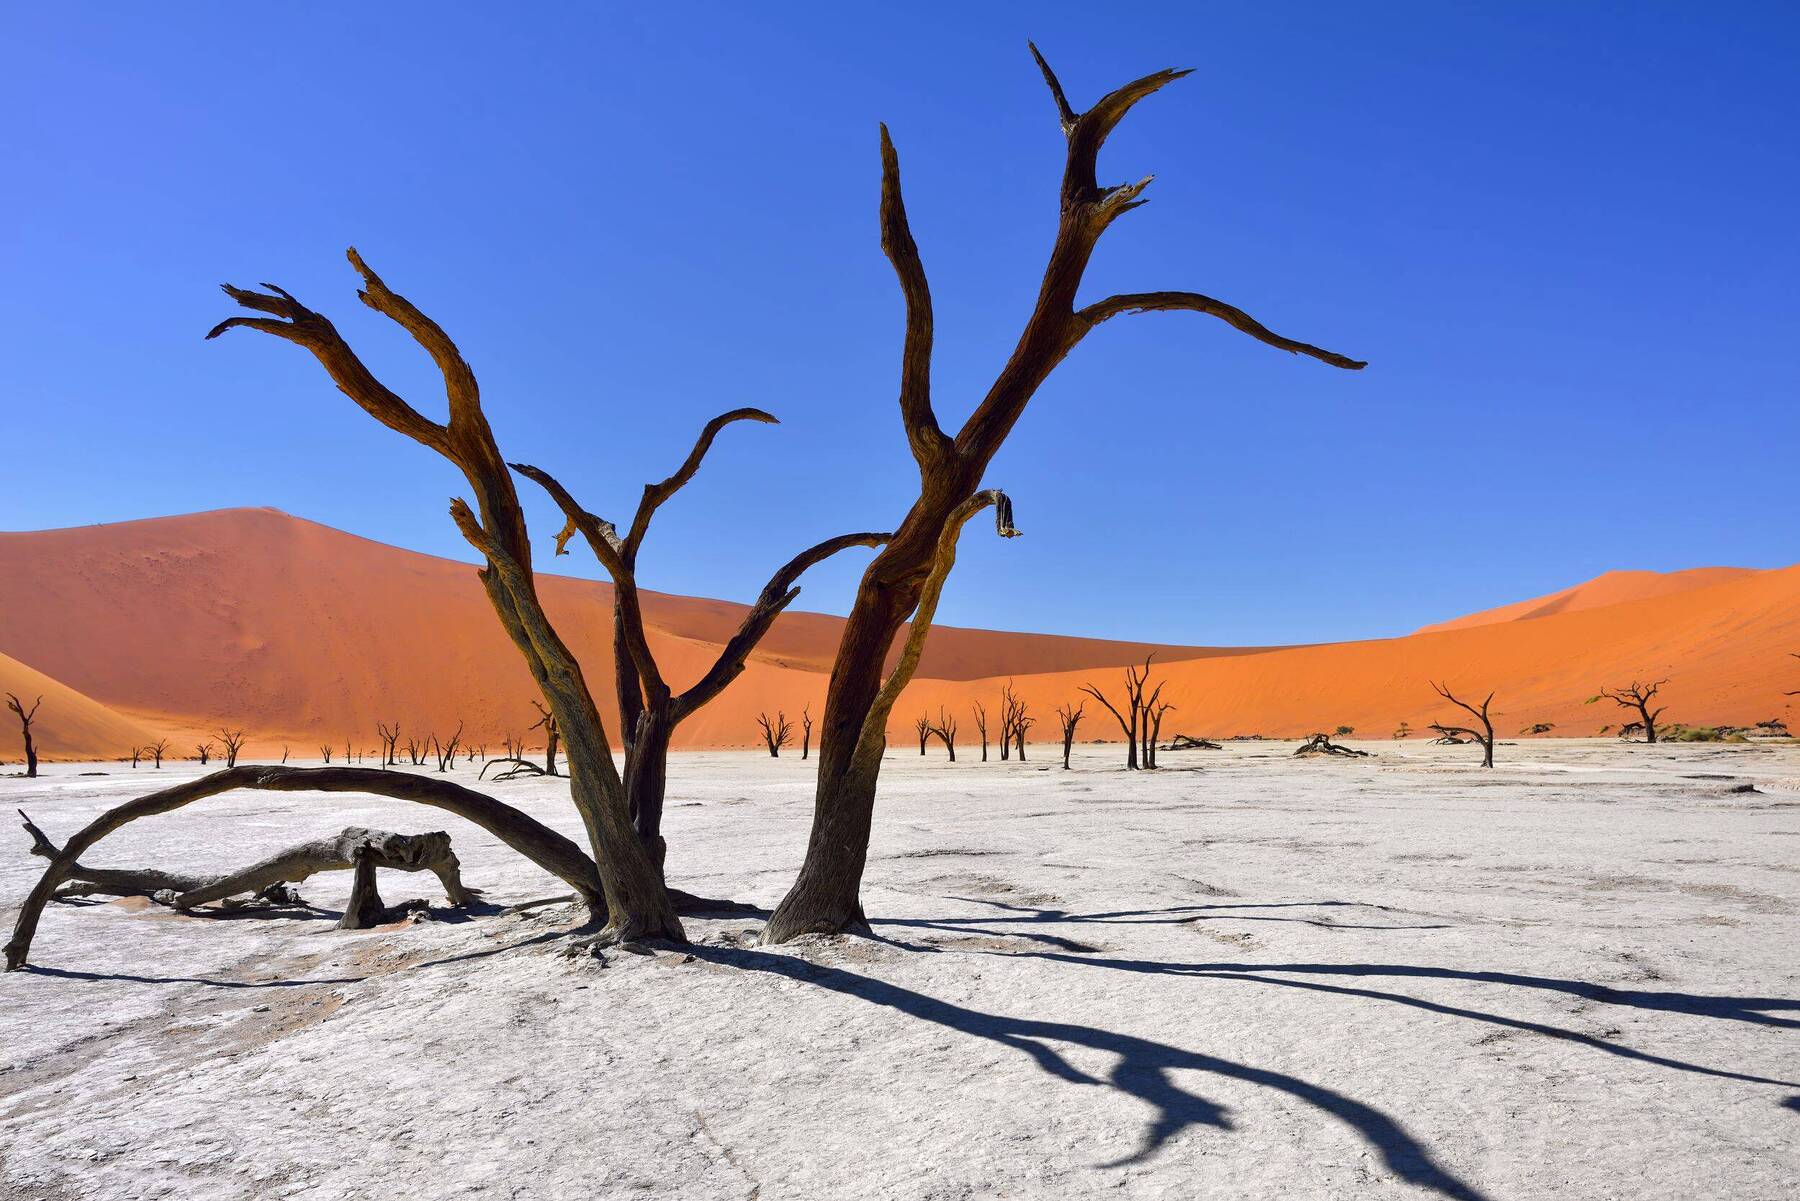 Soul-searching in the remote Namibian desert